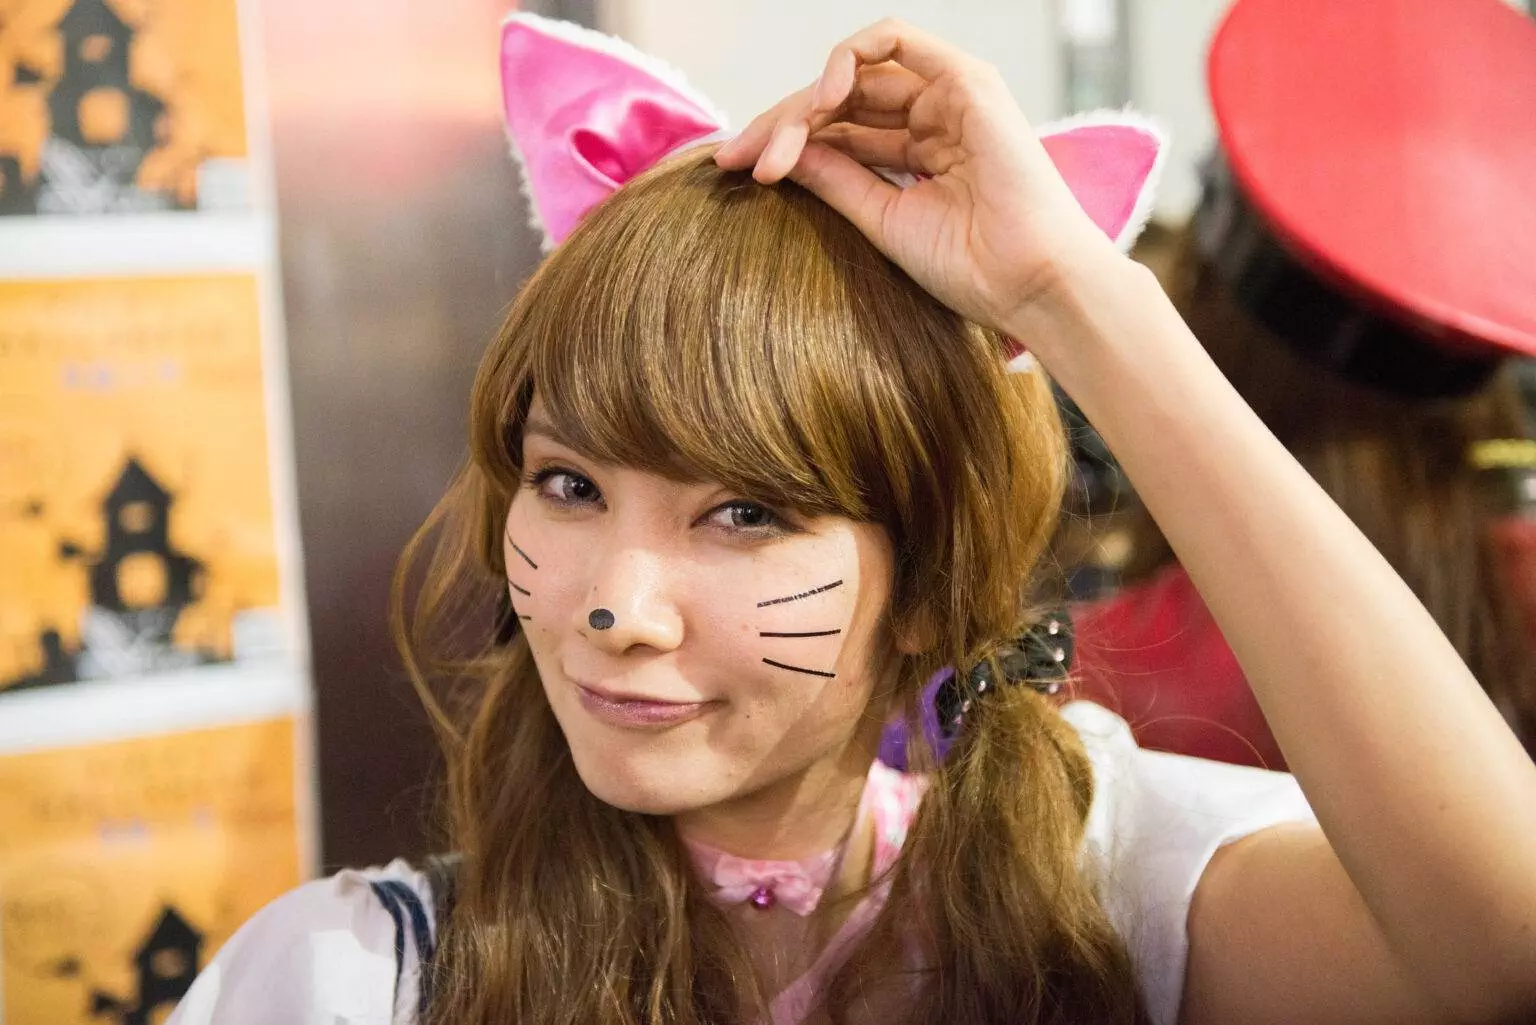 A woman posing while wearing a cat ear headband and makeup.